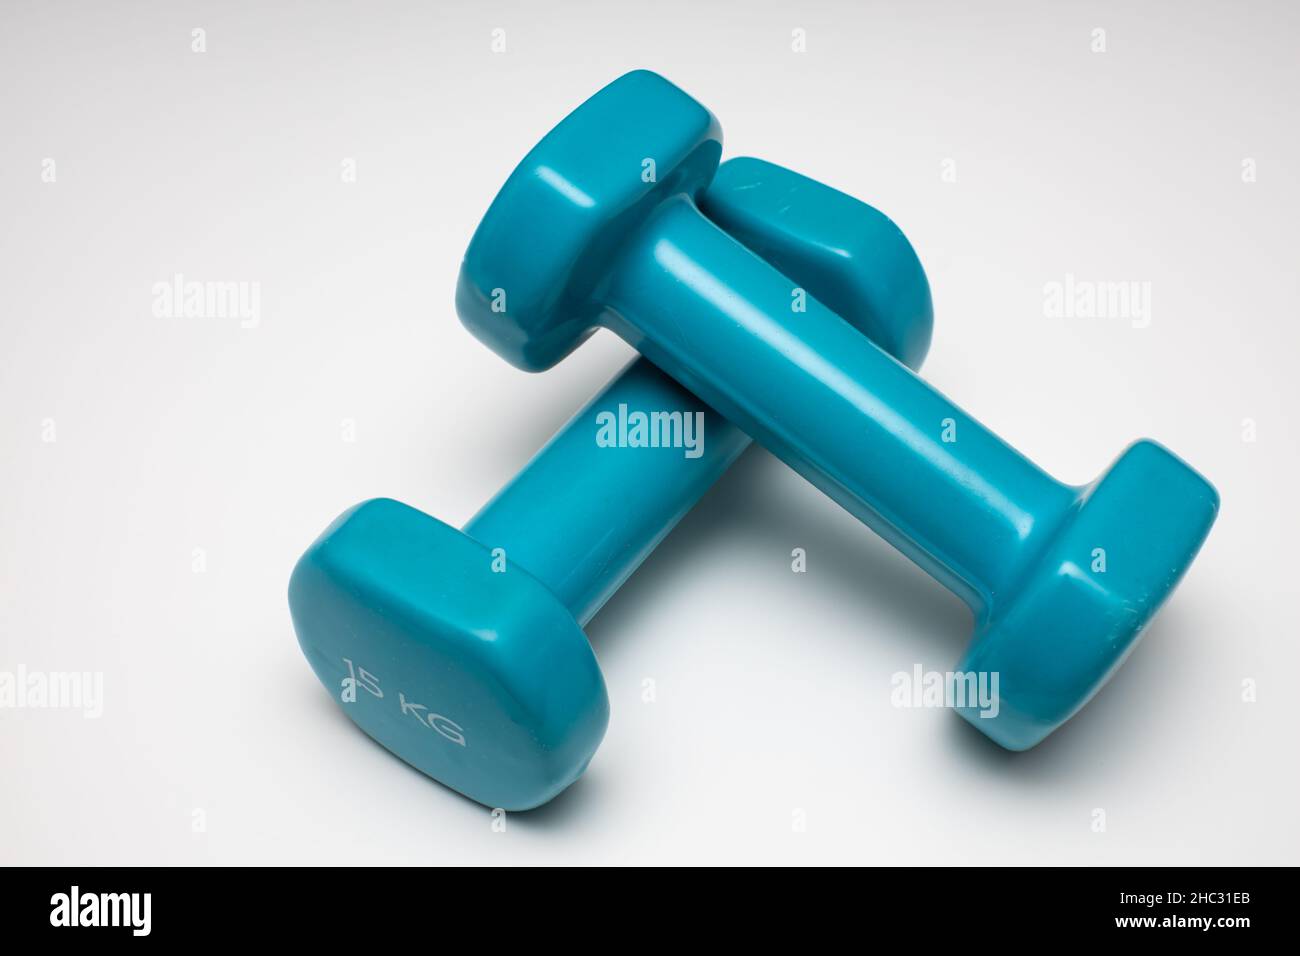 https://c8.alamy.com/comp/2HC31EB/two-small-and-light-dumbbells-lie-on-a-white-background-high-quality-photo-2HC31EB.jpg